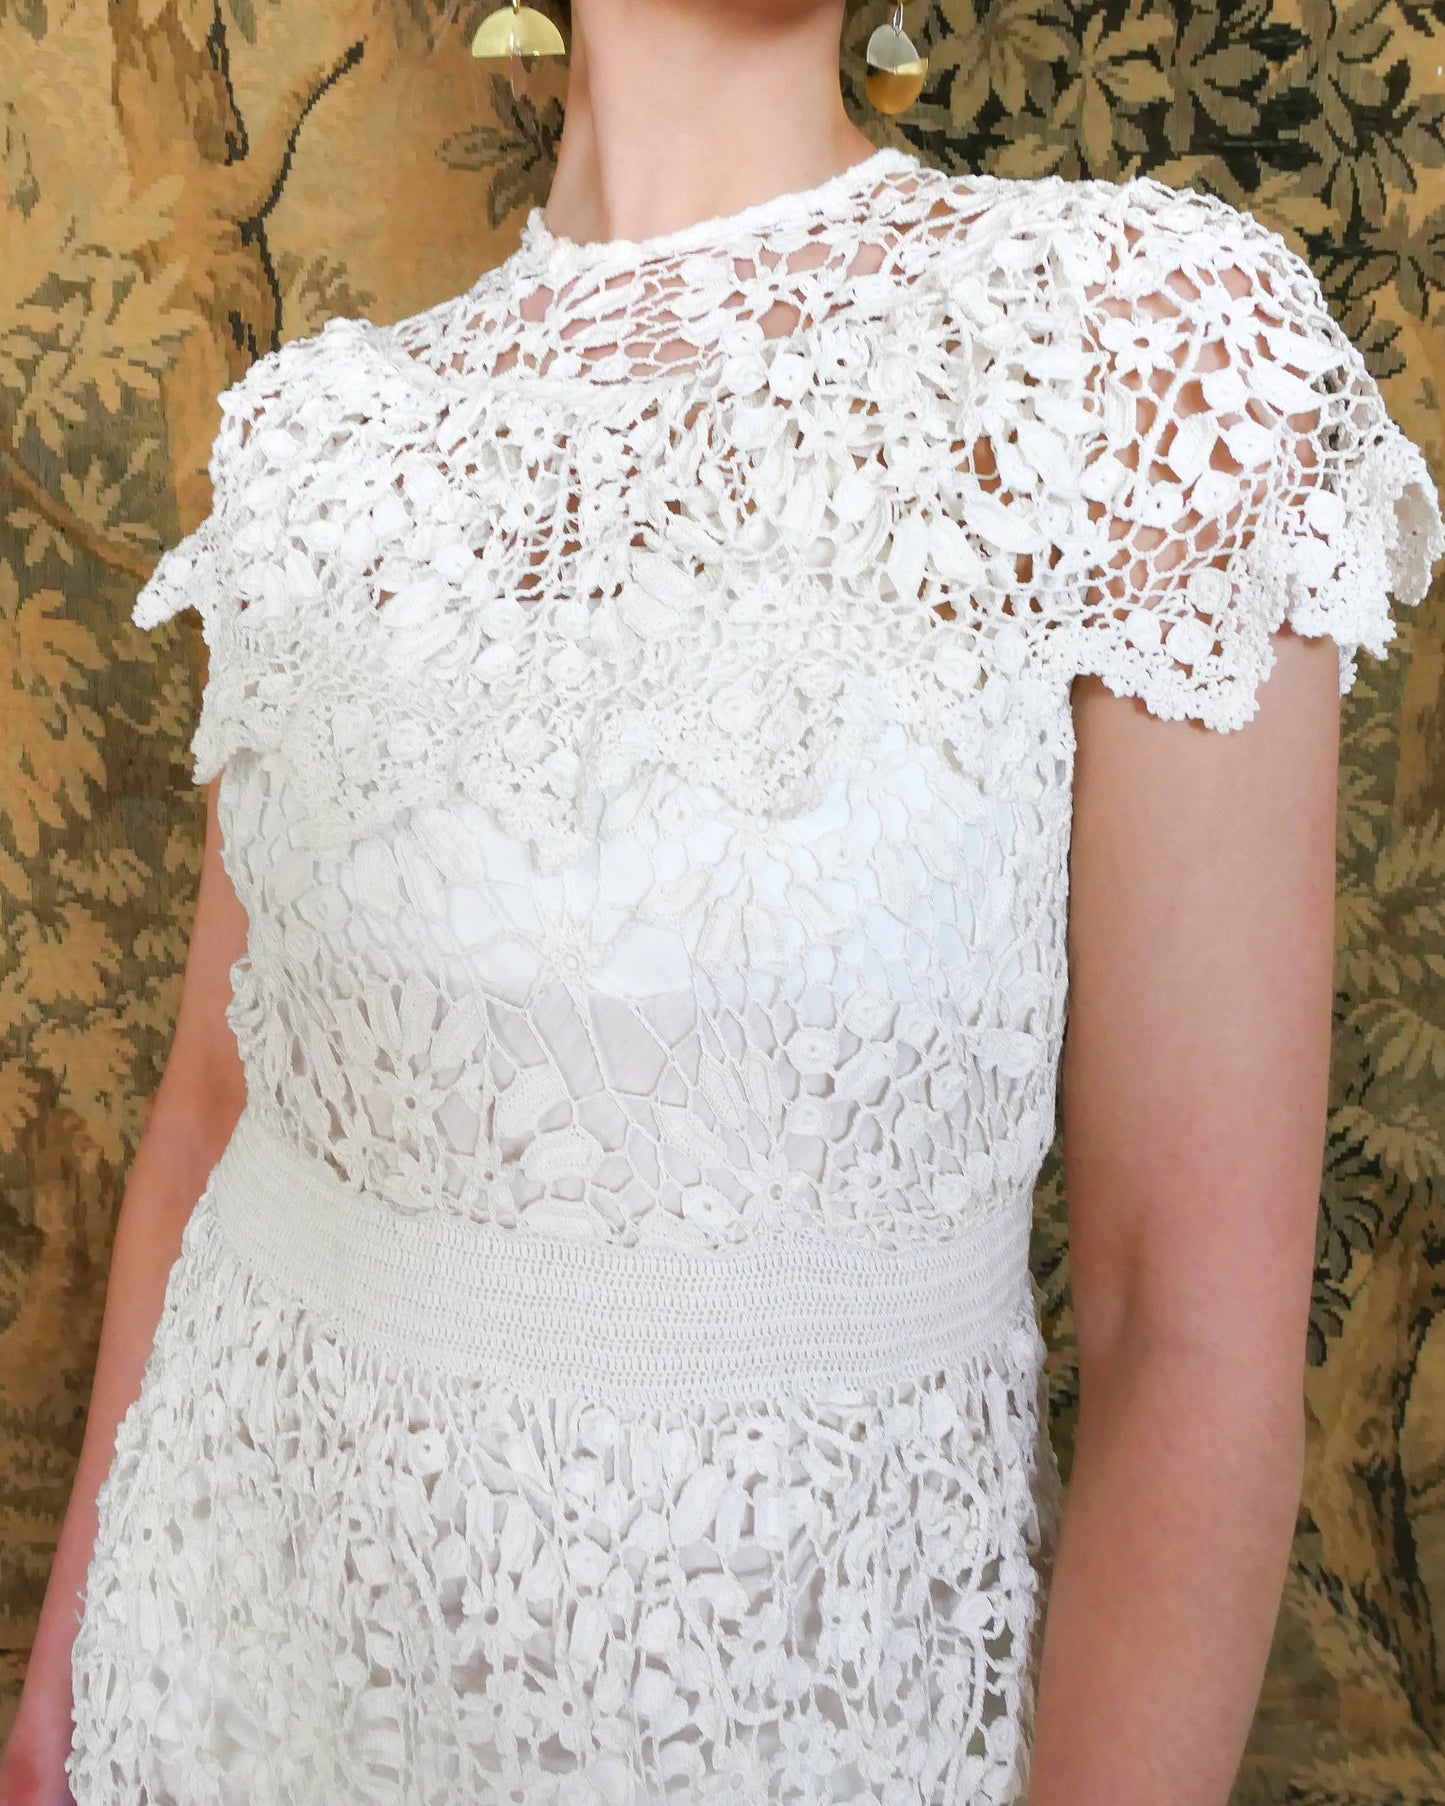 A romantic white crochet midi dress with a floral and leaf pattern, comfortable elastic waistband, and a flattering neck and shoulder design. Perfect as a vintage wedding dress or a special occasion! Wear with a white slip and heels for a refined, feminine look, or pair with boots for a more casual outing.